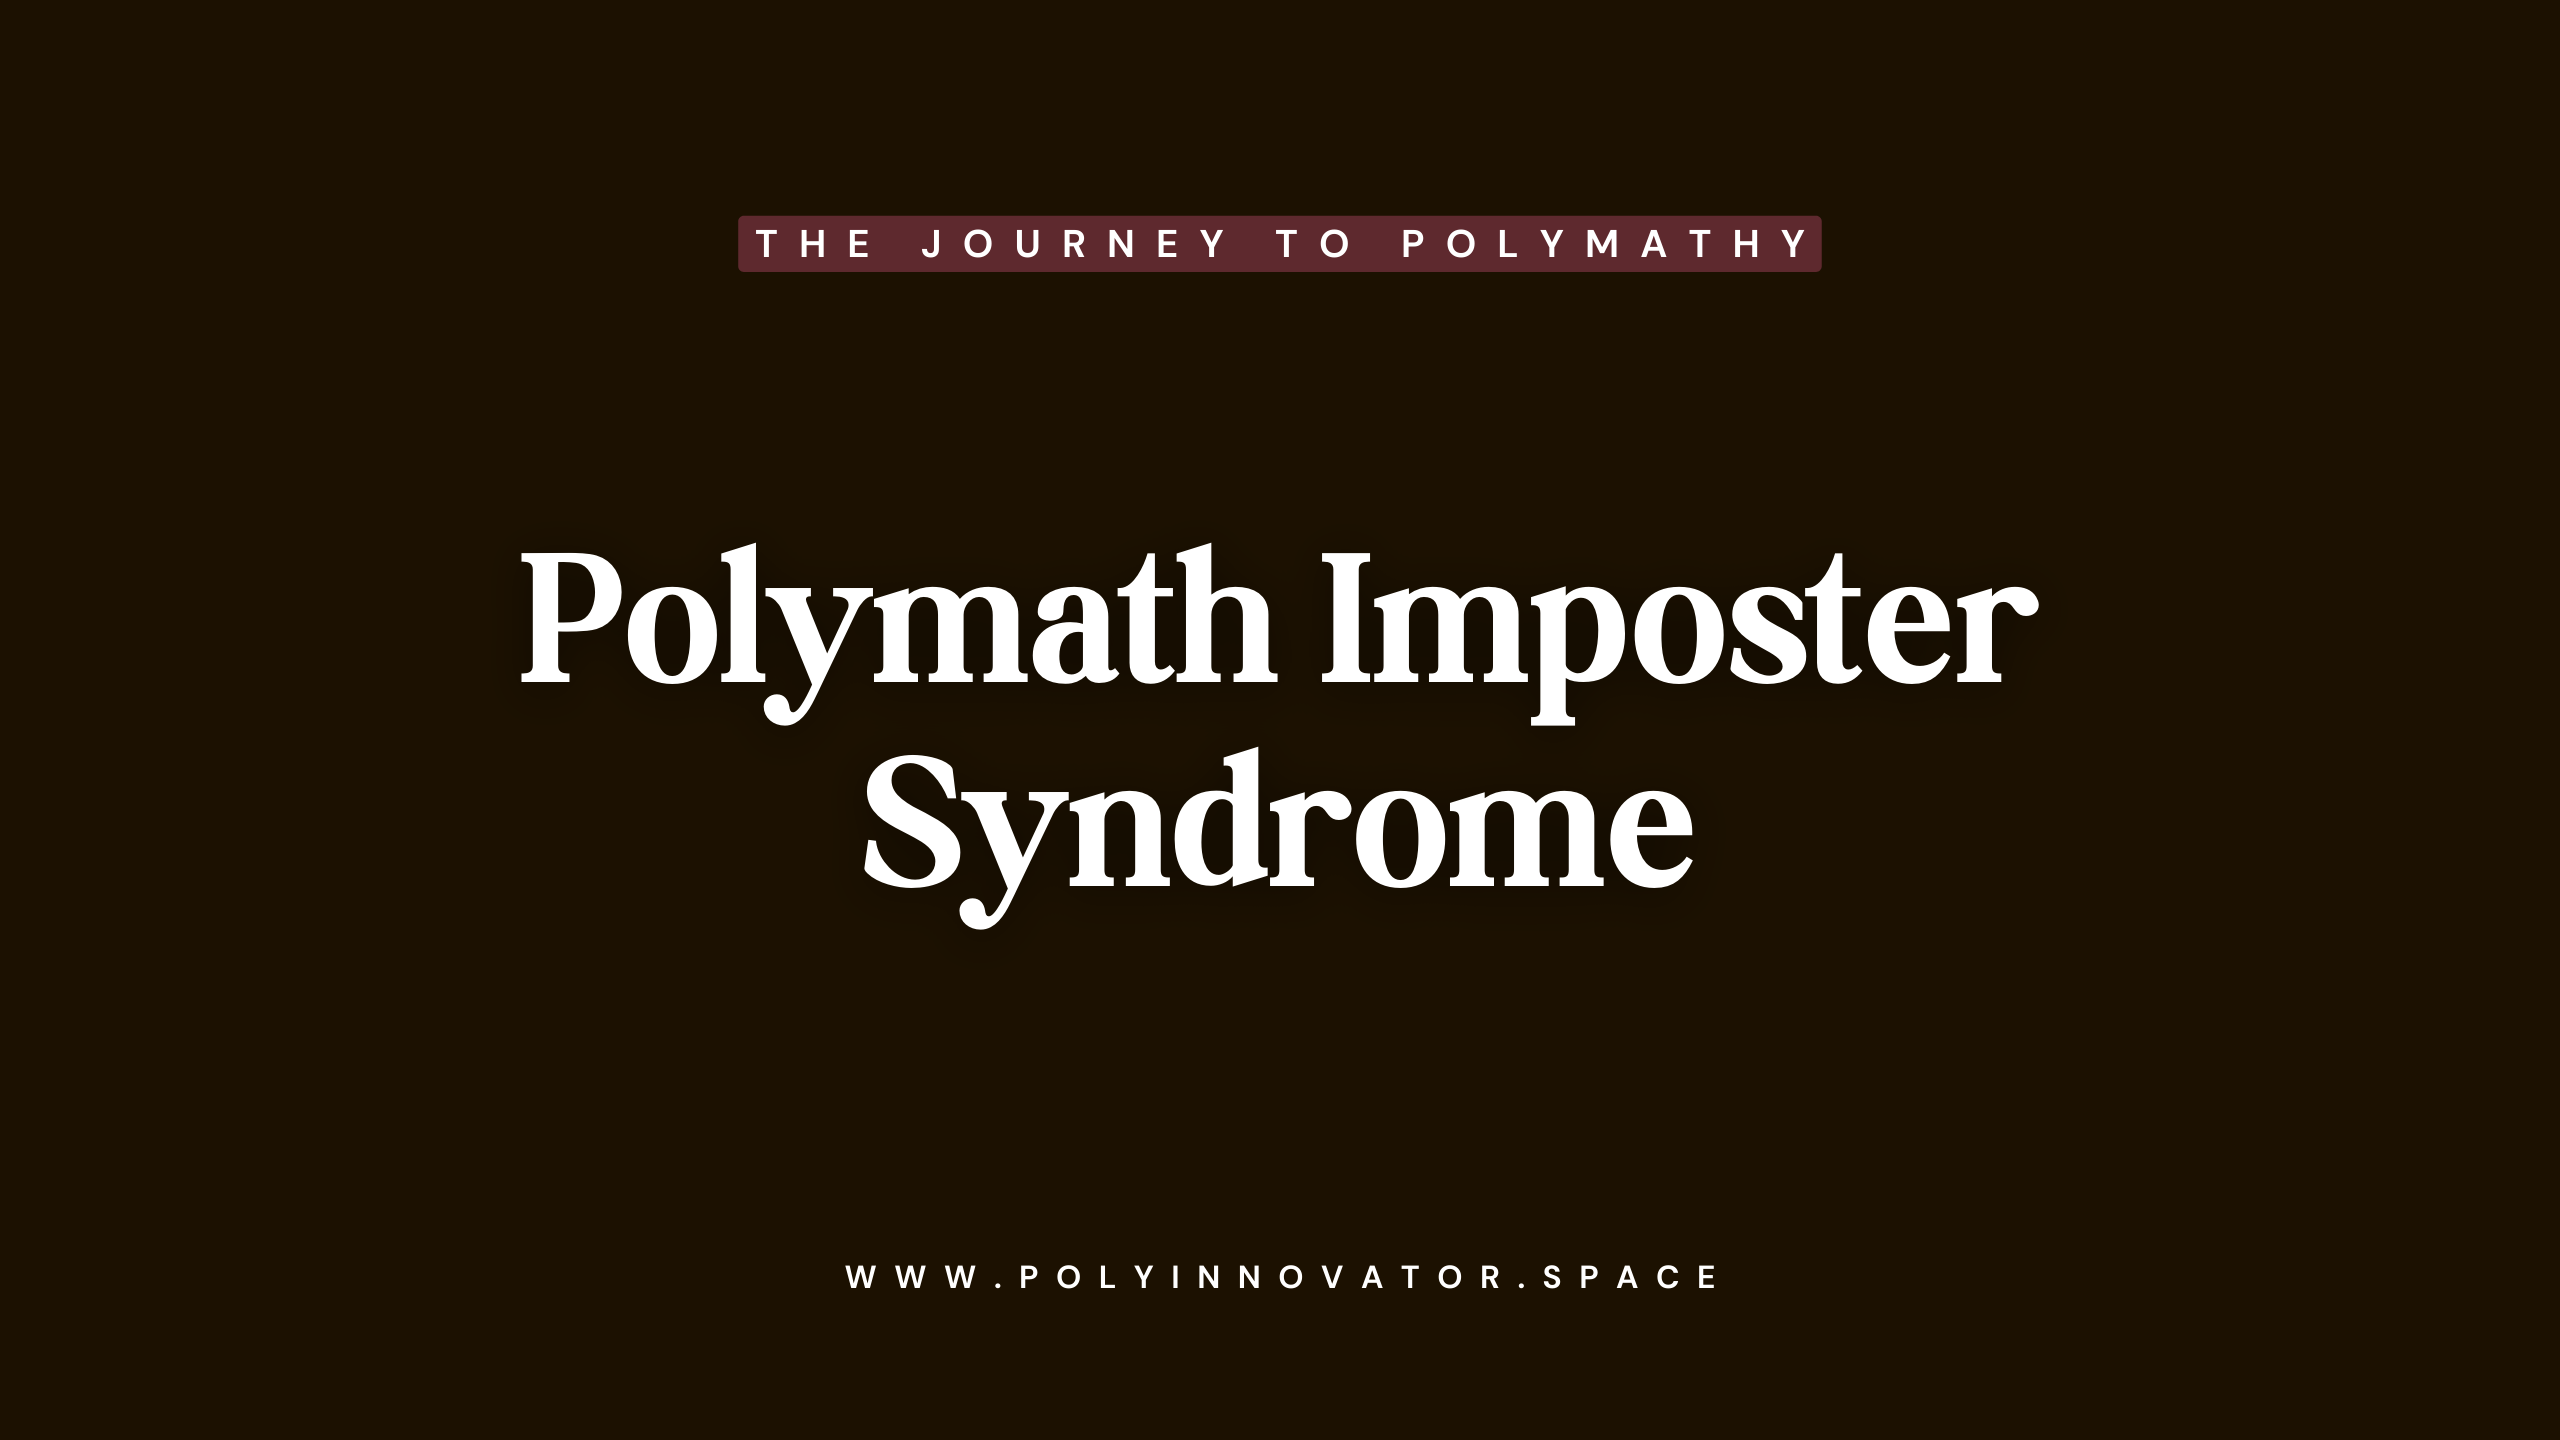 Polymath Imposter Syndrome